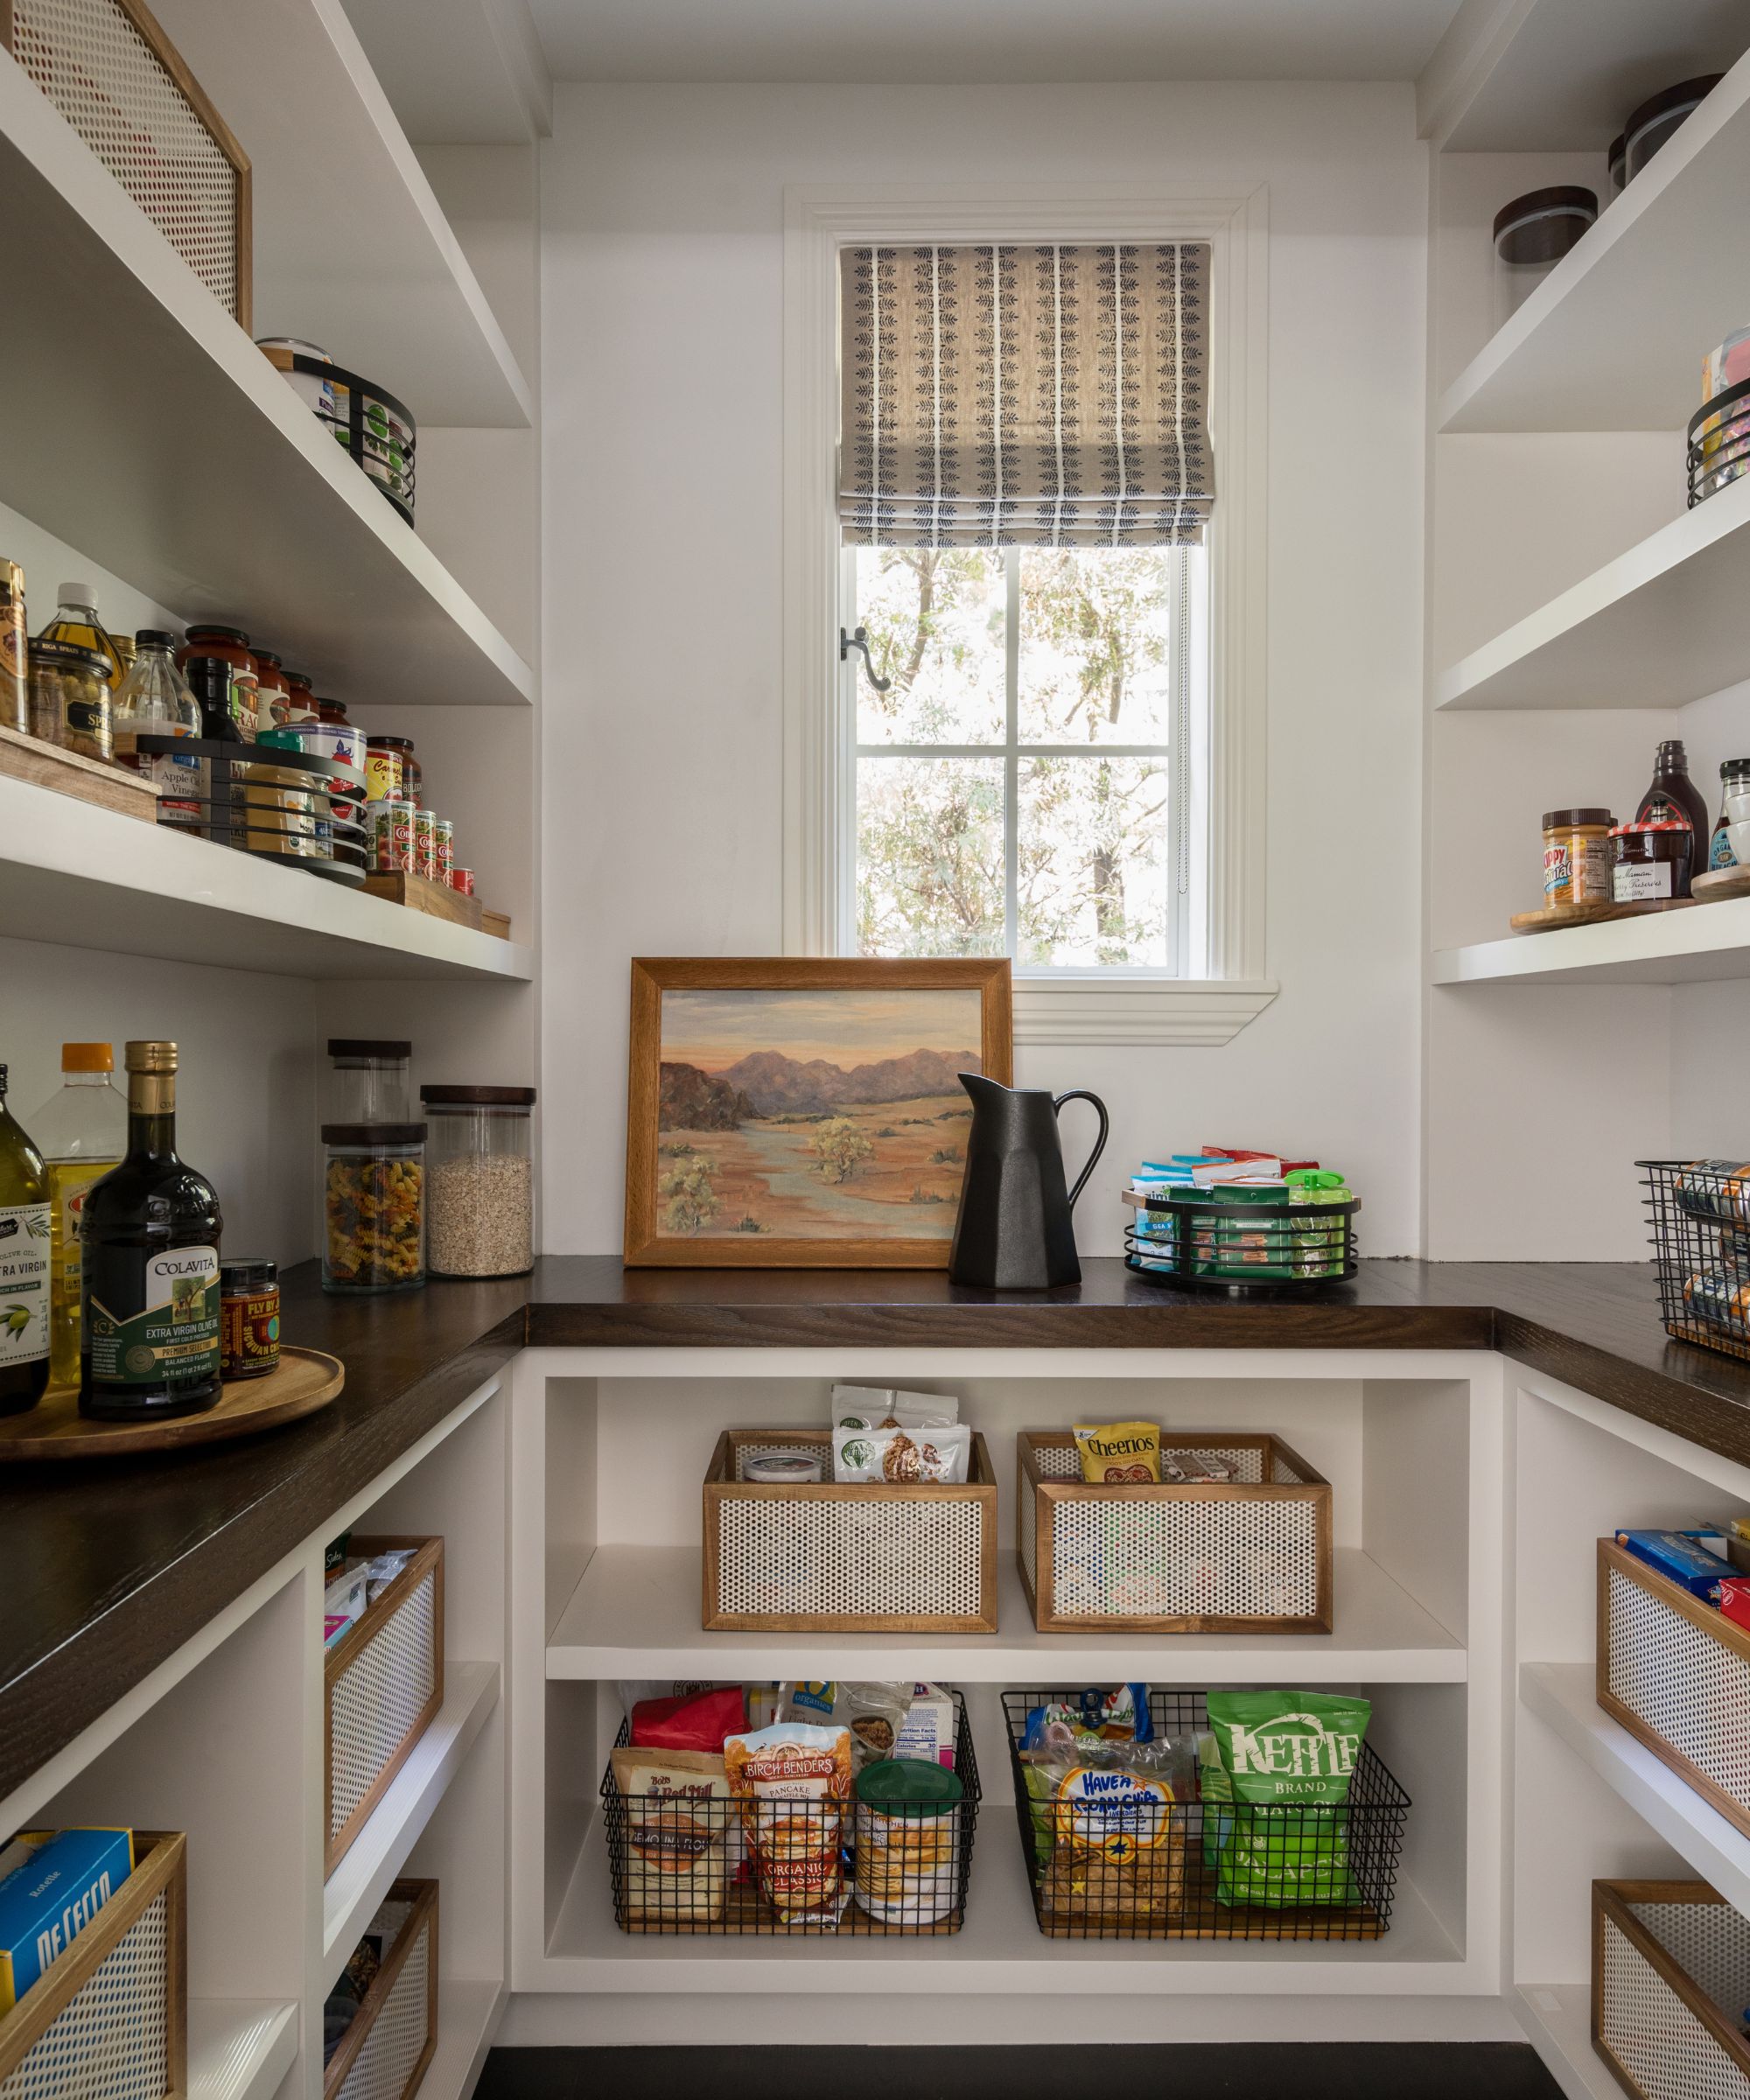 A walk in pantry with wraparound shelving and a small window